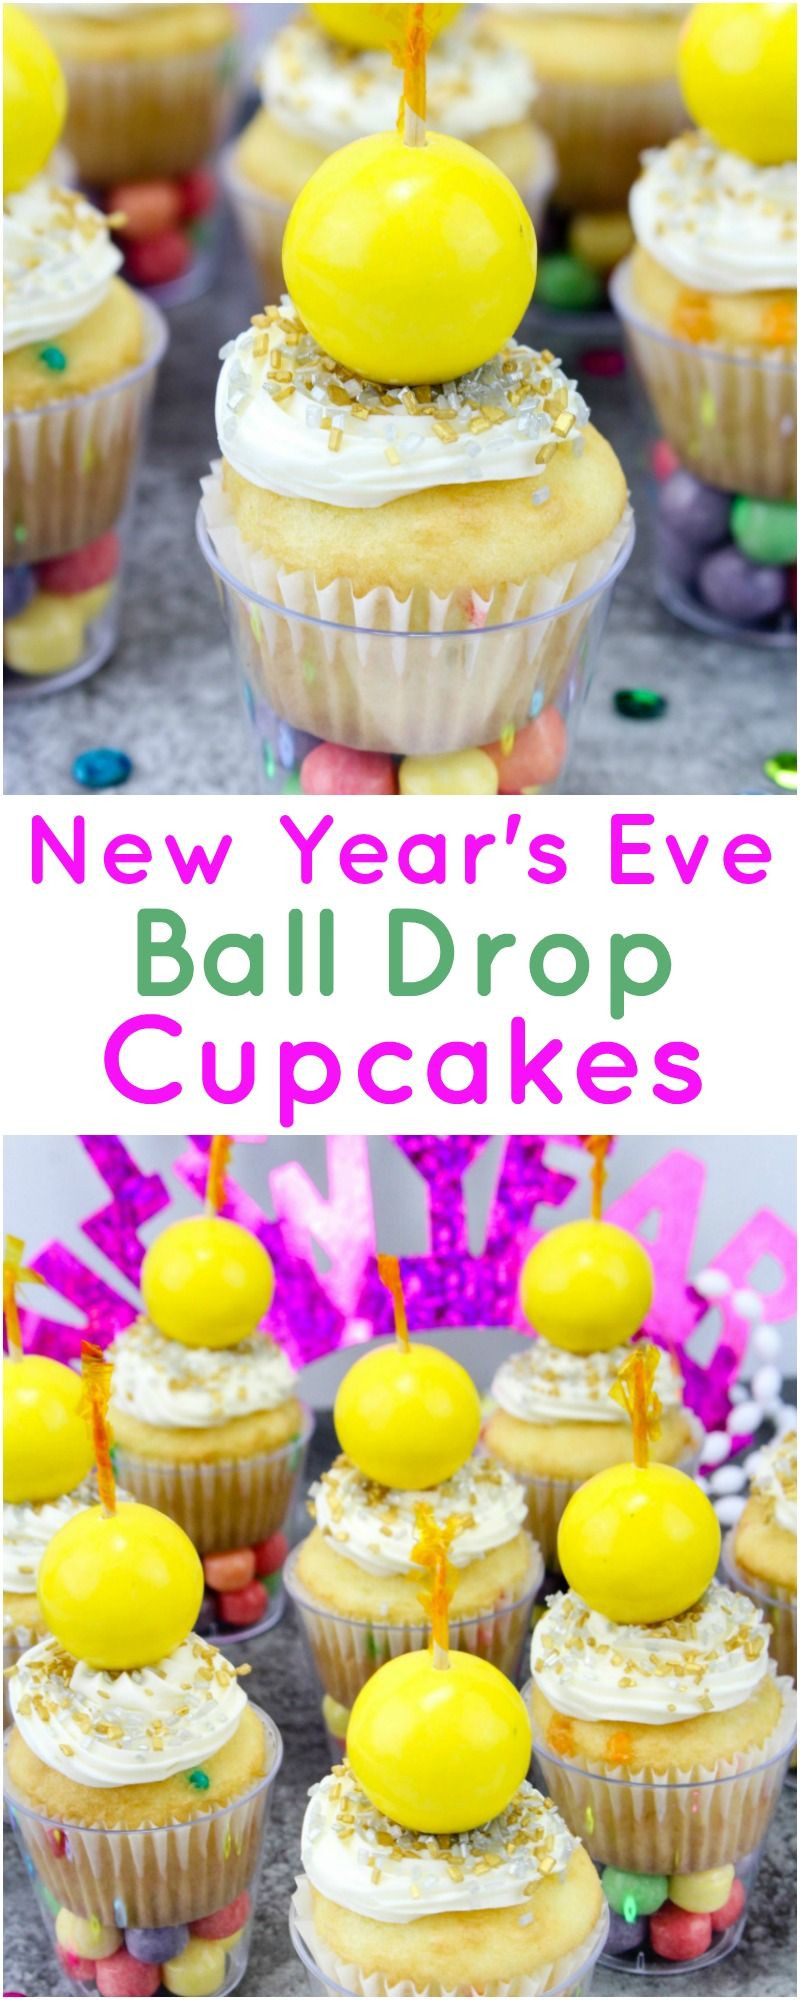 New Year'S Eve Desserts Party Ideas
 New Year’s Eve Ball Drop Cupcakes Recipe